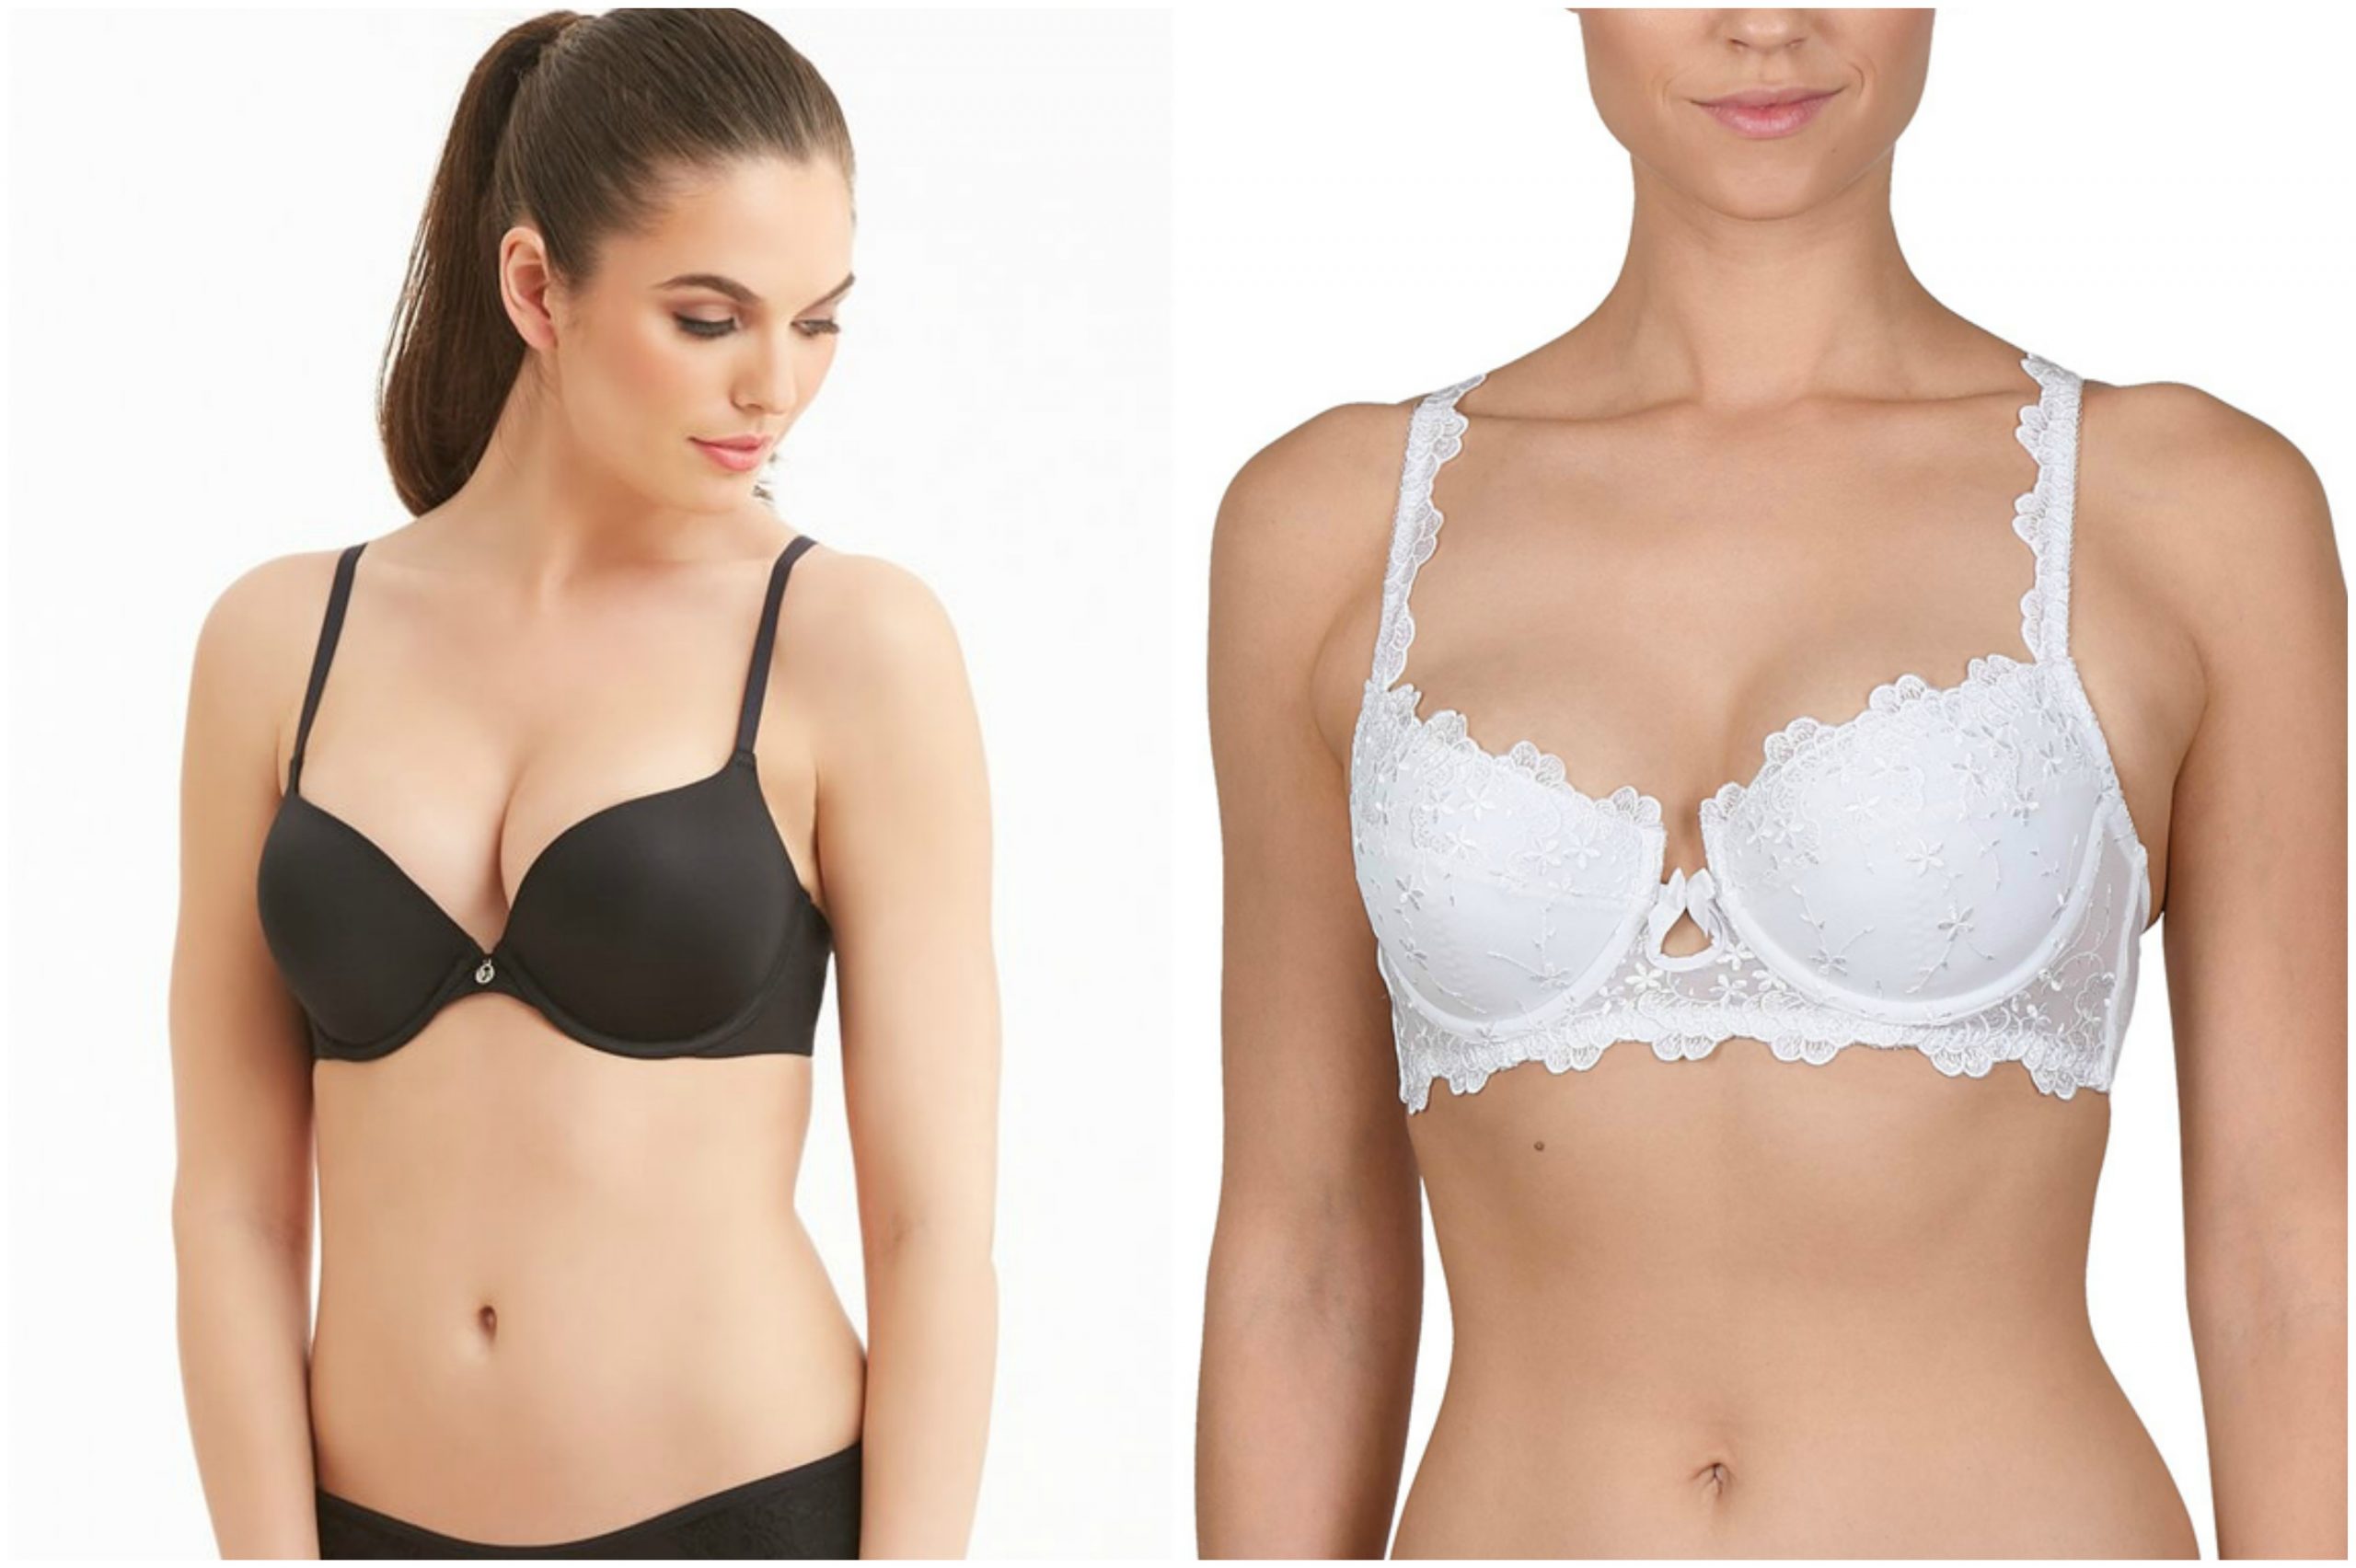 Should I size up in the bombshell bra? I know push-up bras account